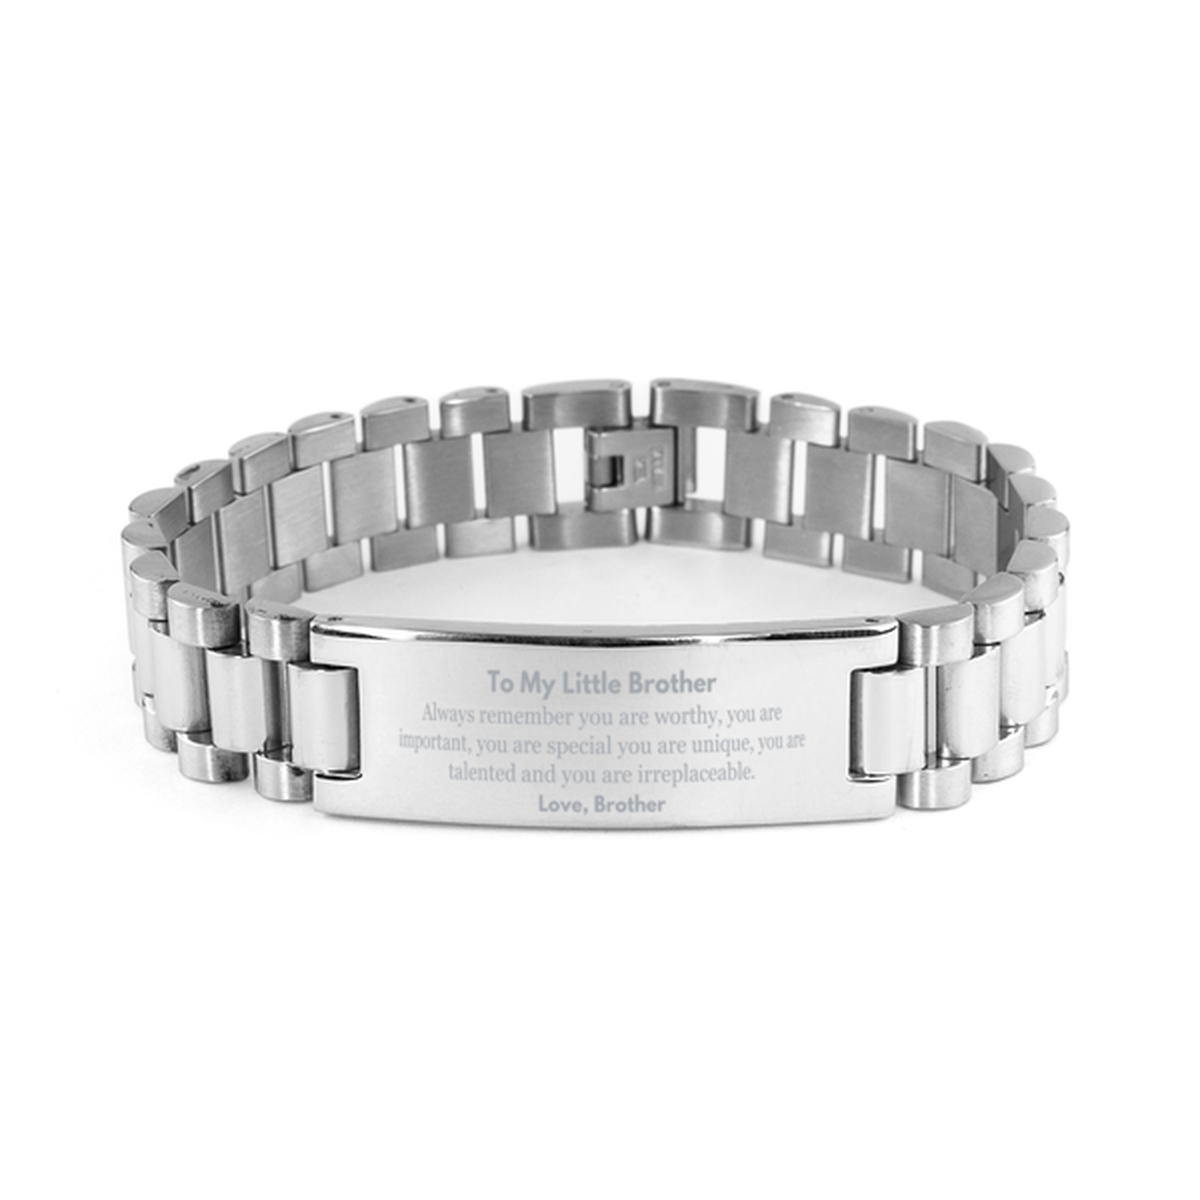 Little Brother Birthday Gifts from Brother, Inspirational Ladder Stainless Steel Bracelet for Little Brother Christmas Graduation Gifts for Little Brother Always remember you are worthy, you are important. Love, Brother